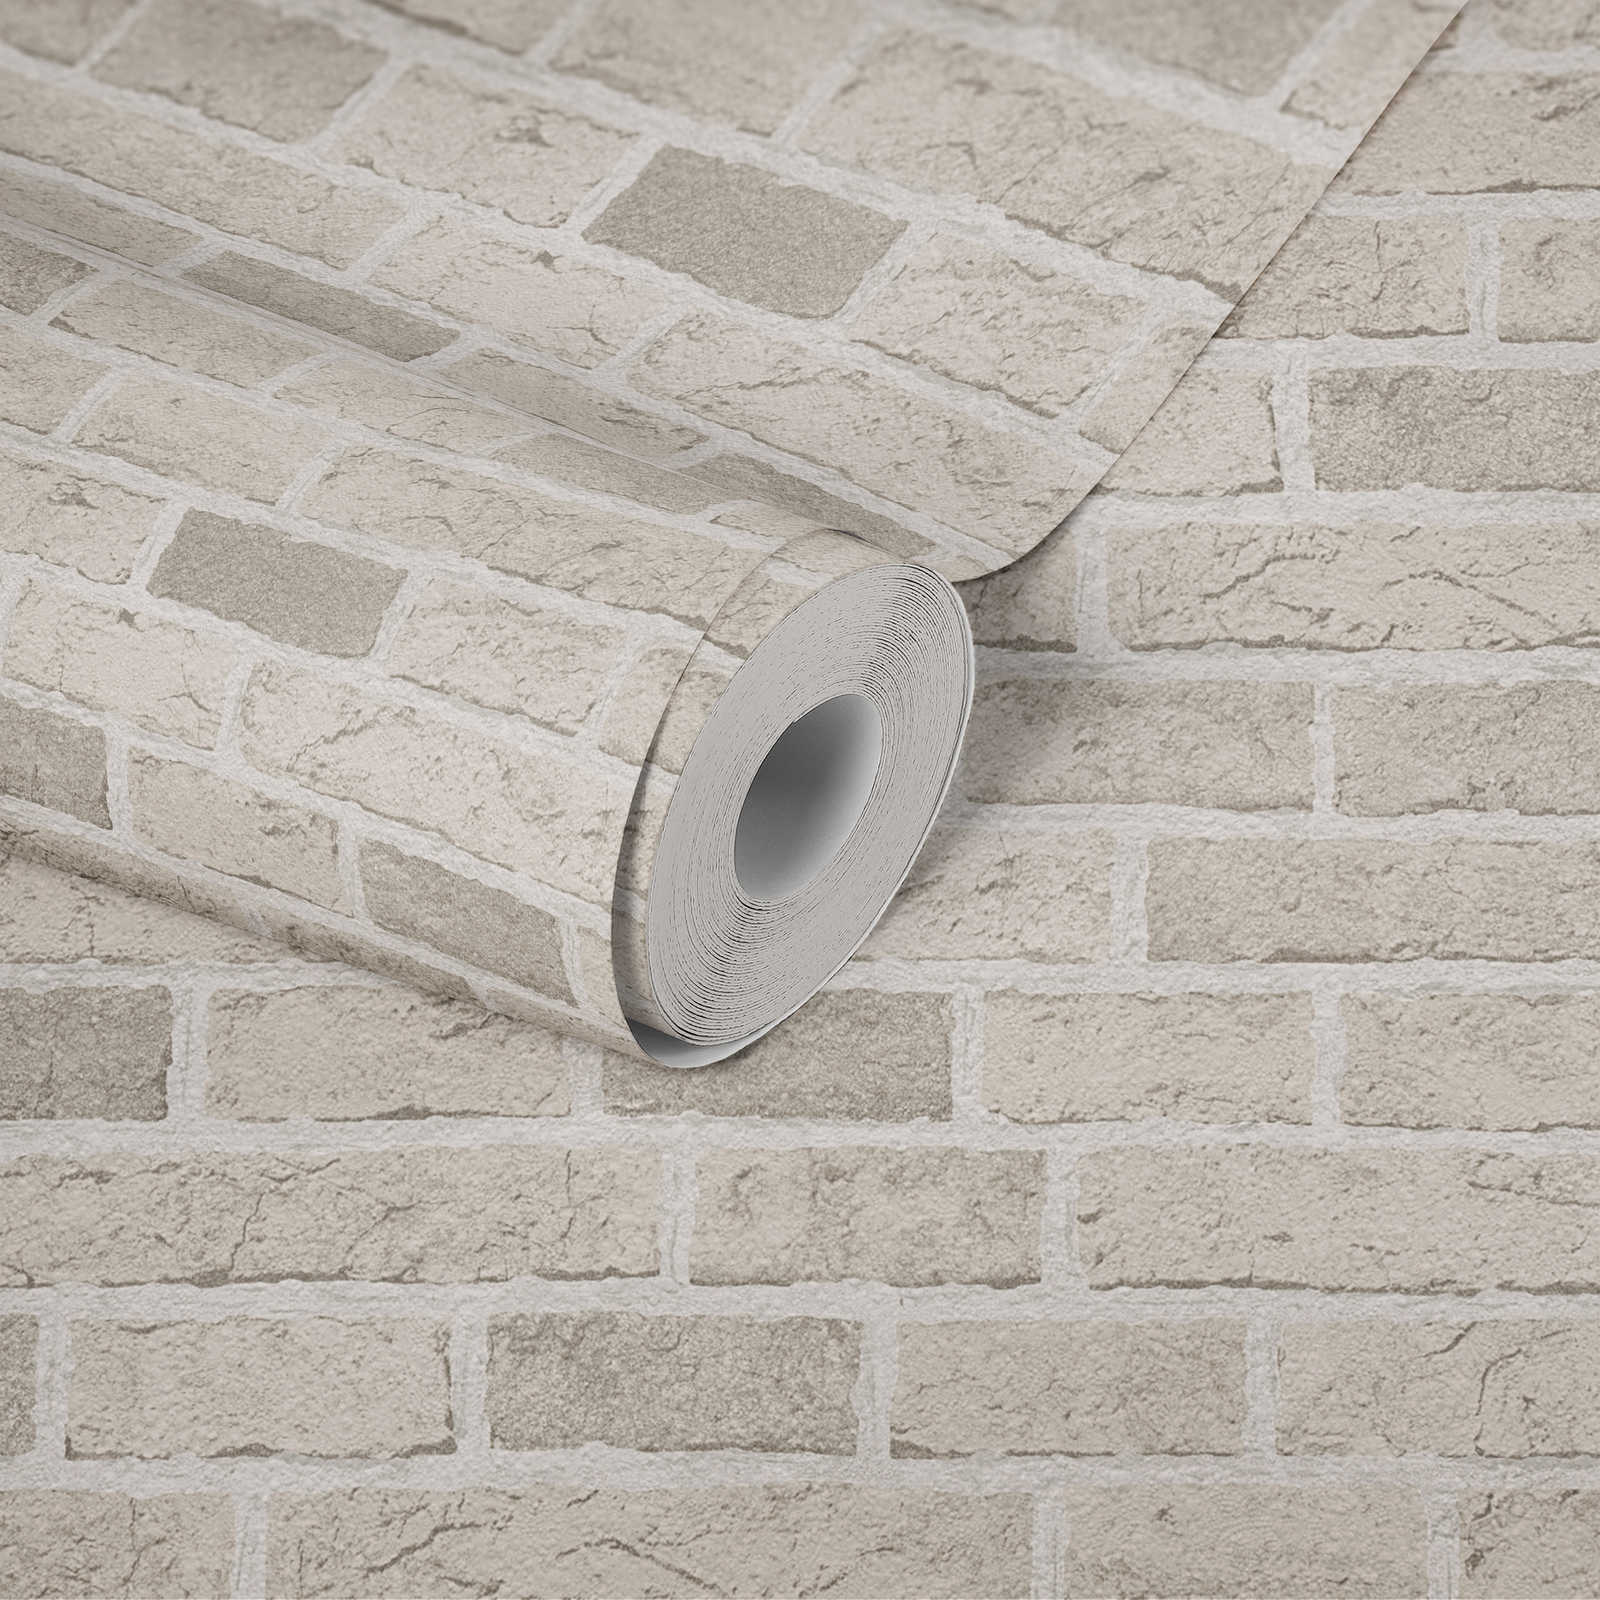             Stone wallpaper with brick wall rustic & detailed - cream, beige
        